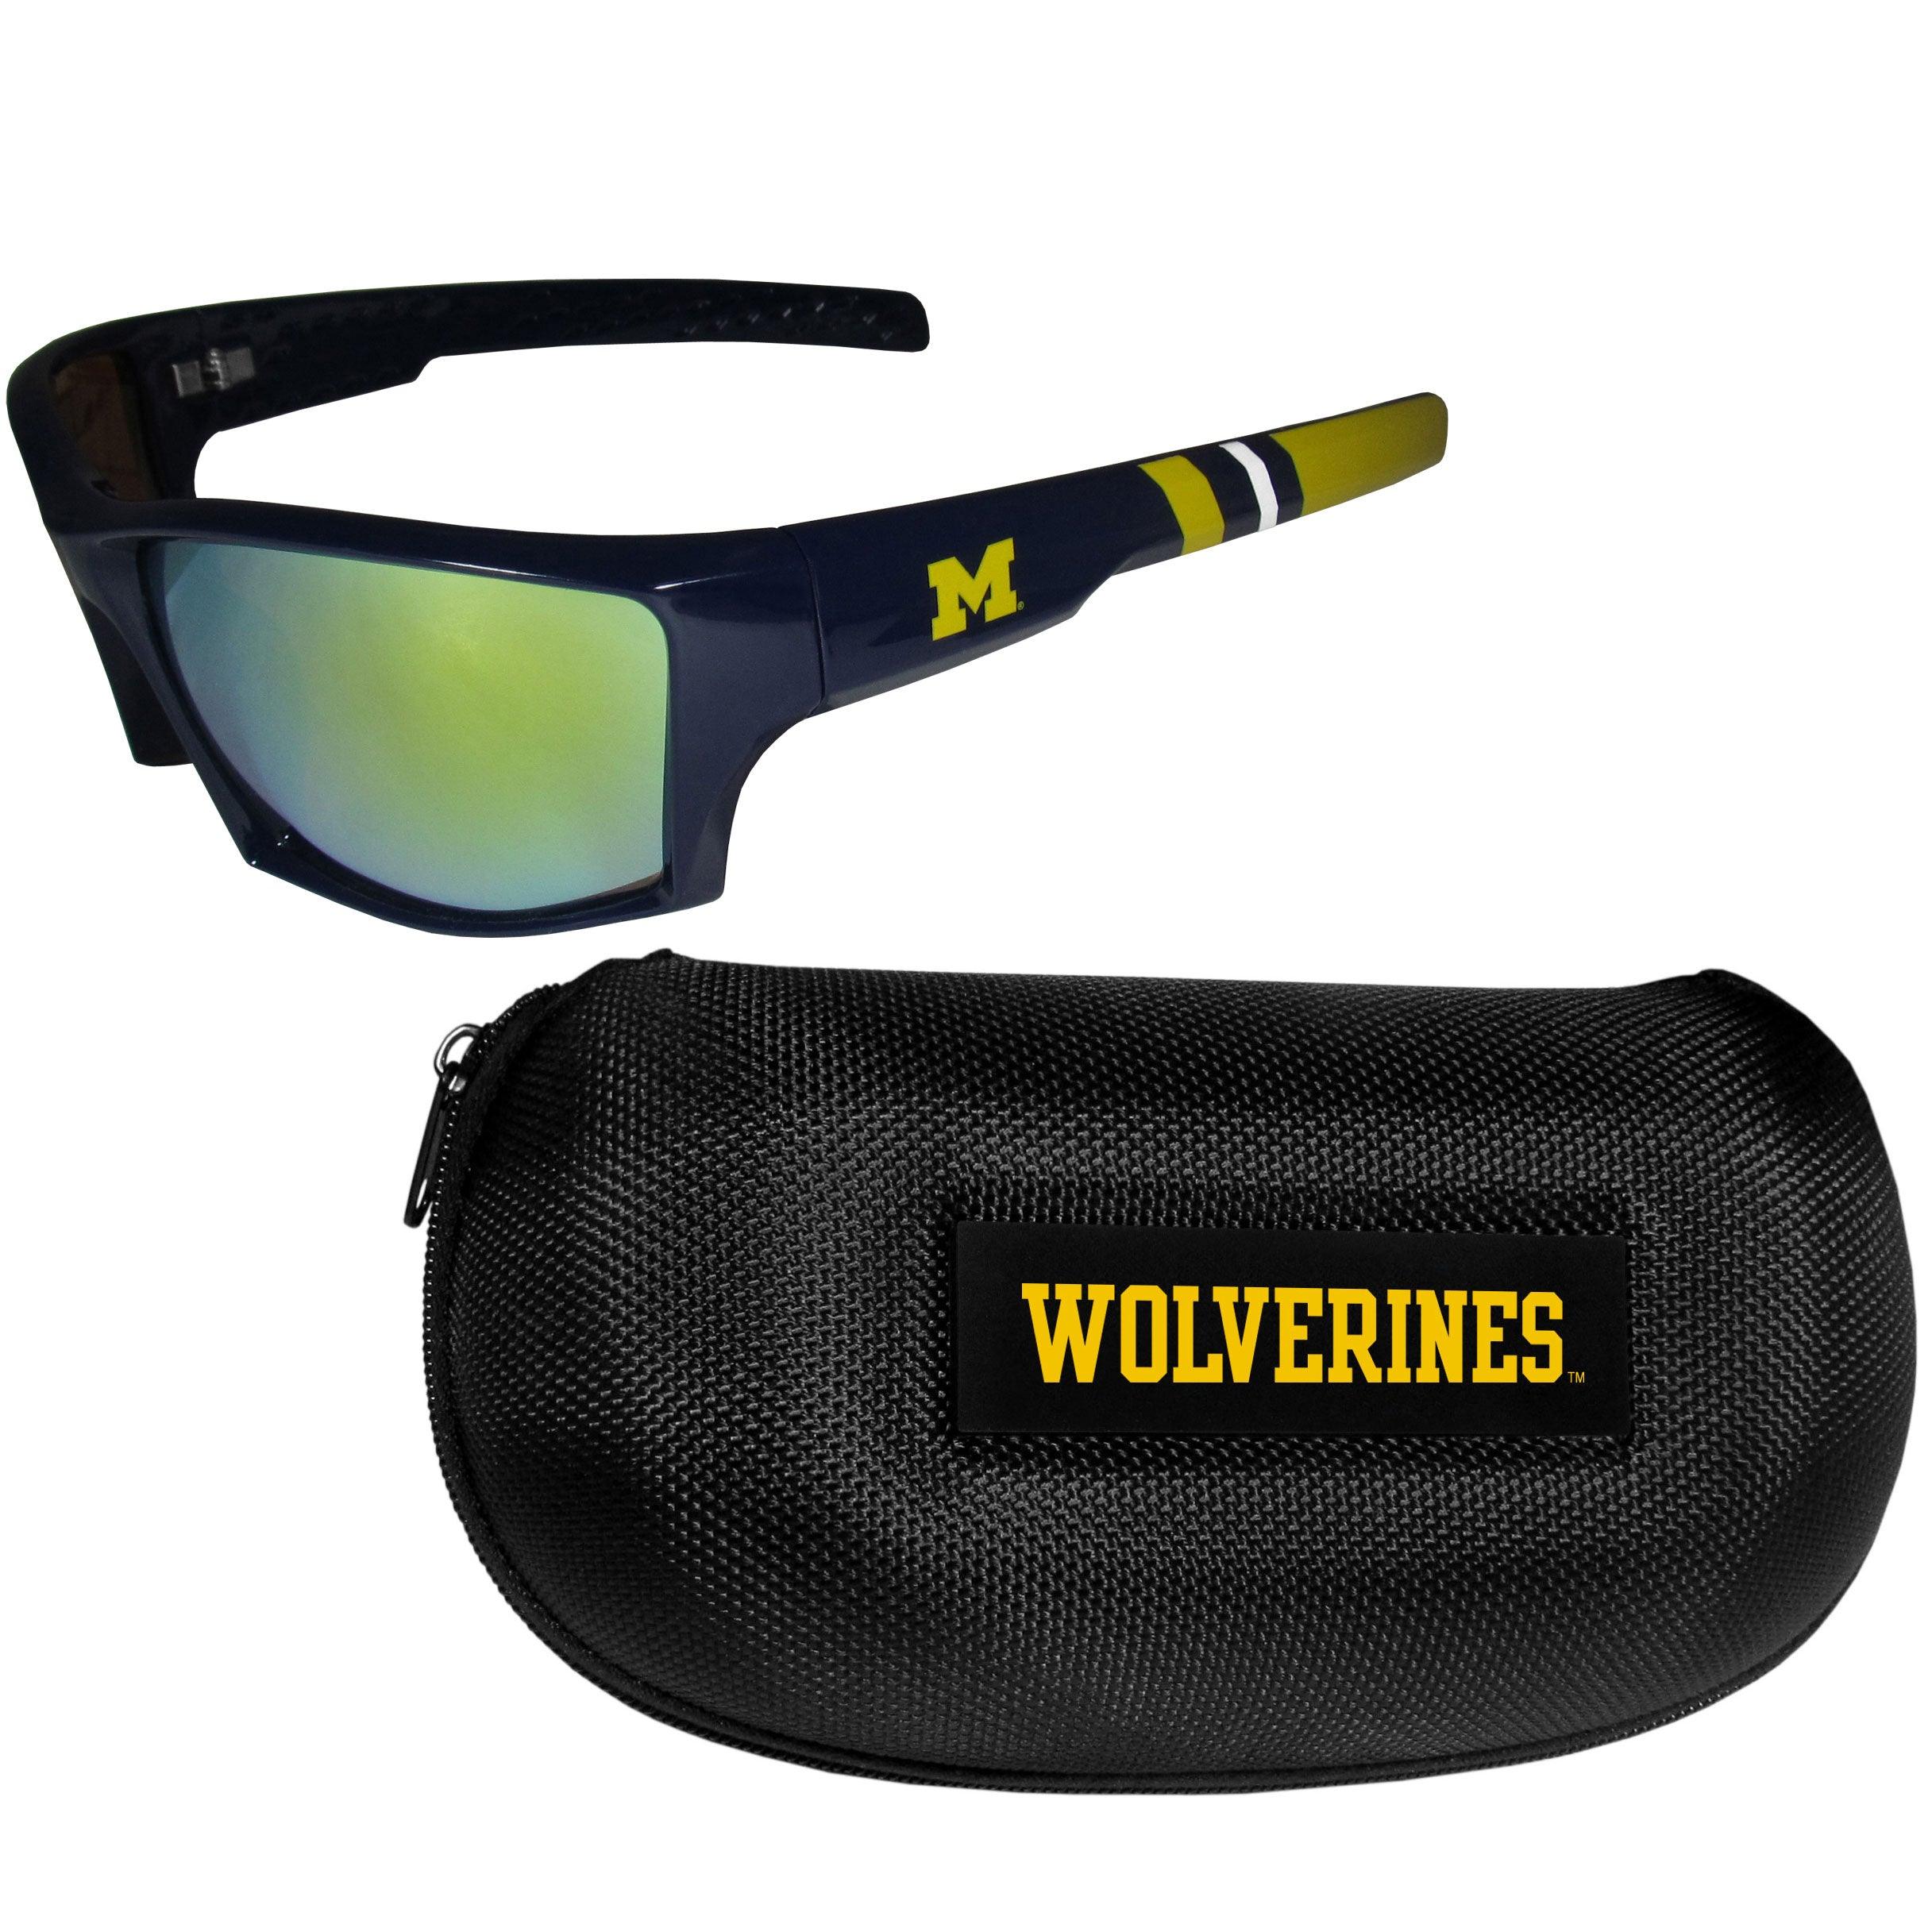 Michigan Wolverines Edge Wrap Sunglass and Case Set - Flyclothing LLC